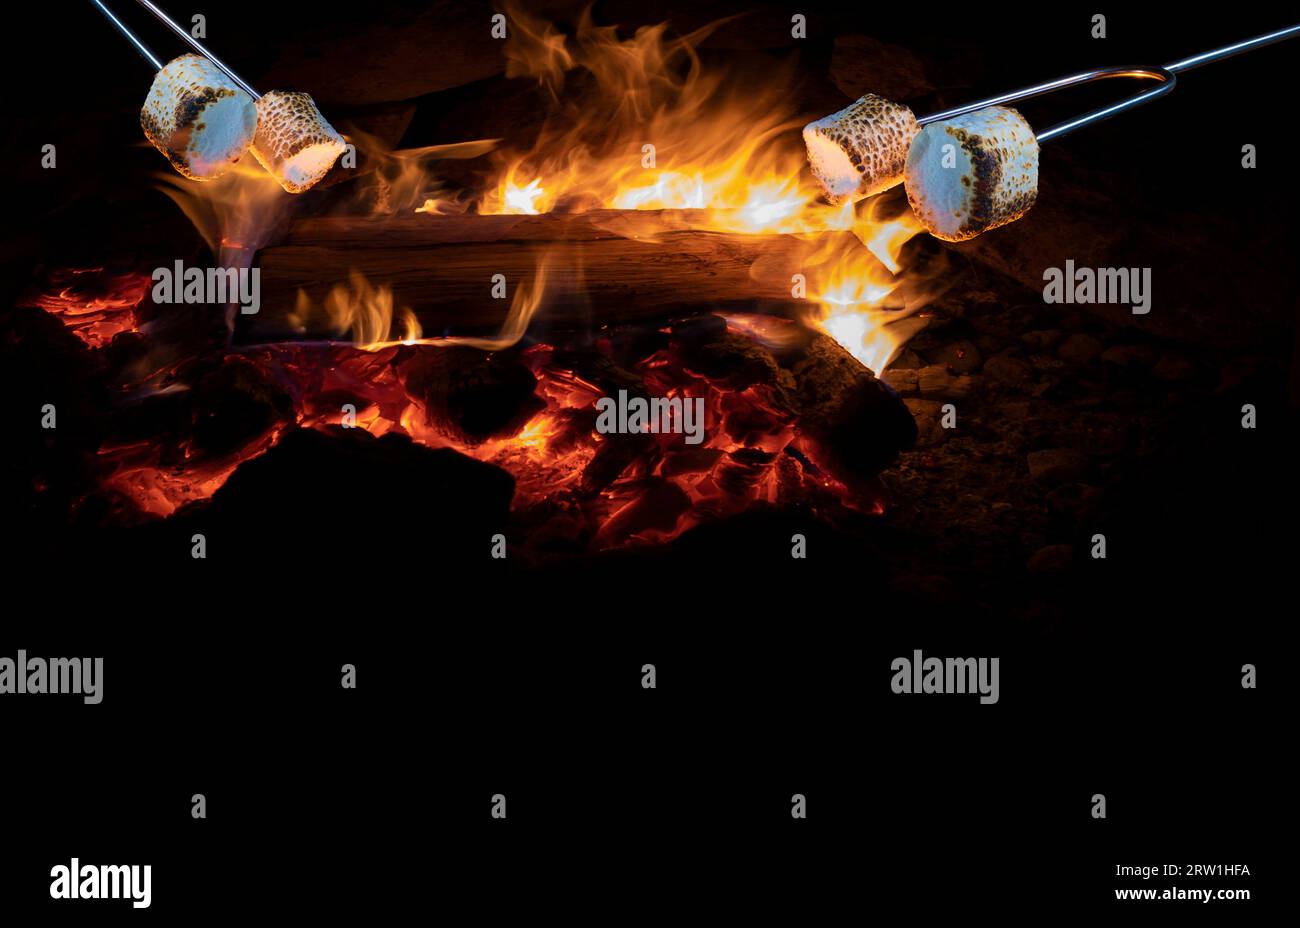 Marshmallows being licked by a campfire's flames at night with copy space below Stock Photo